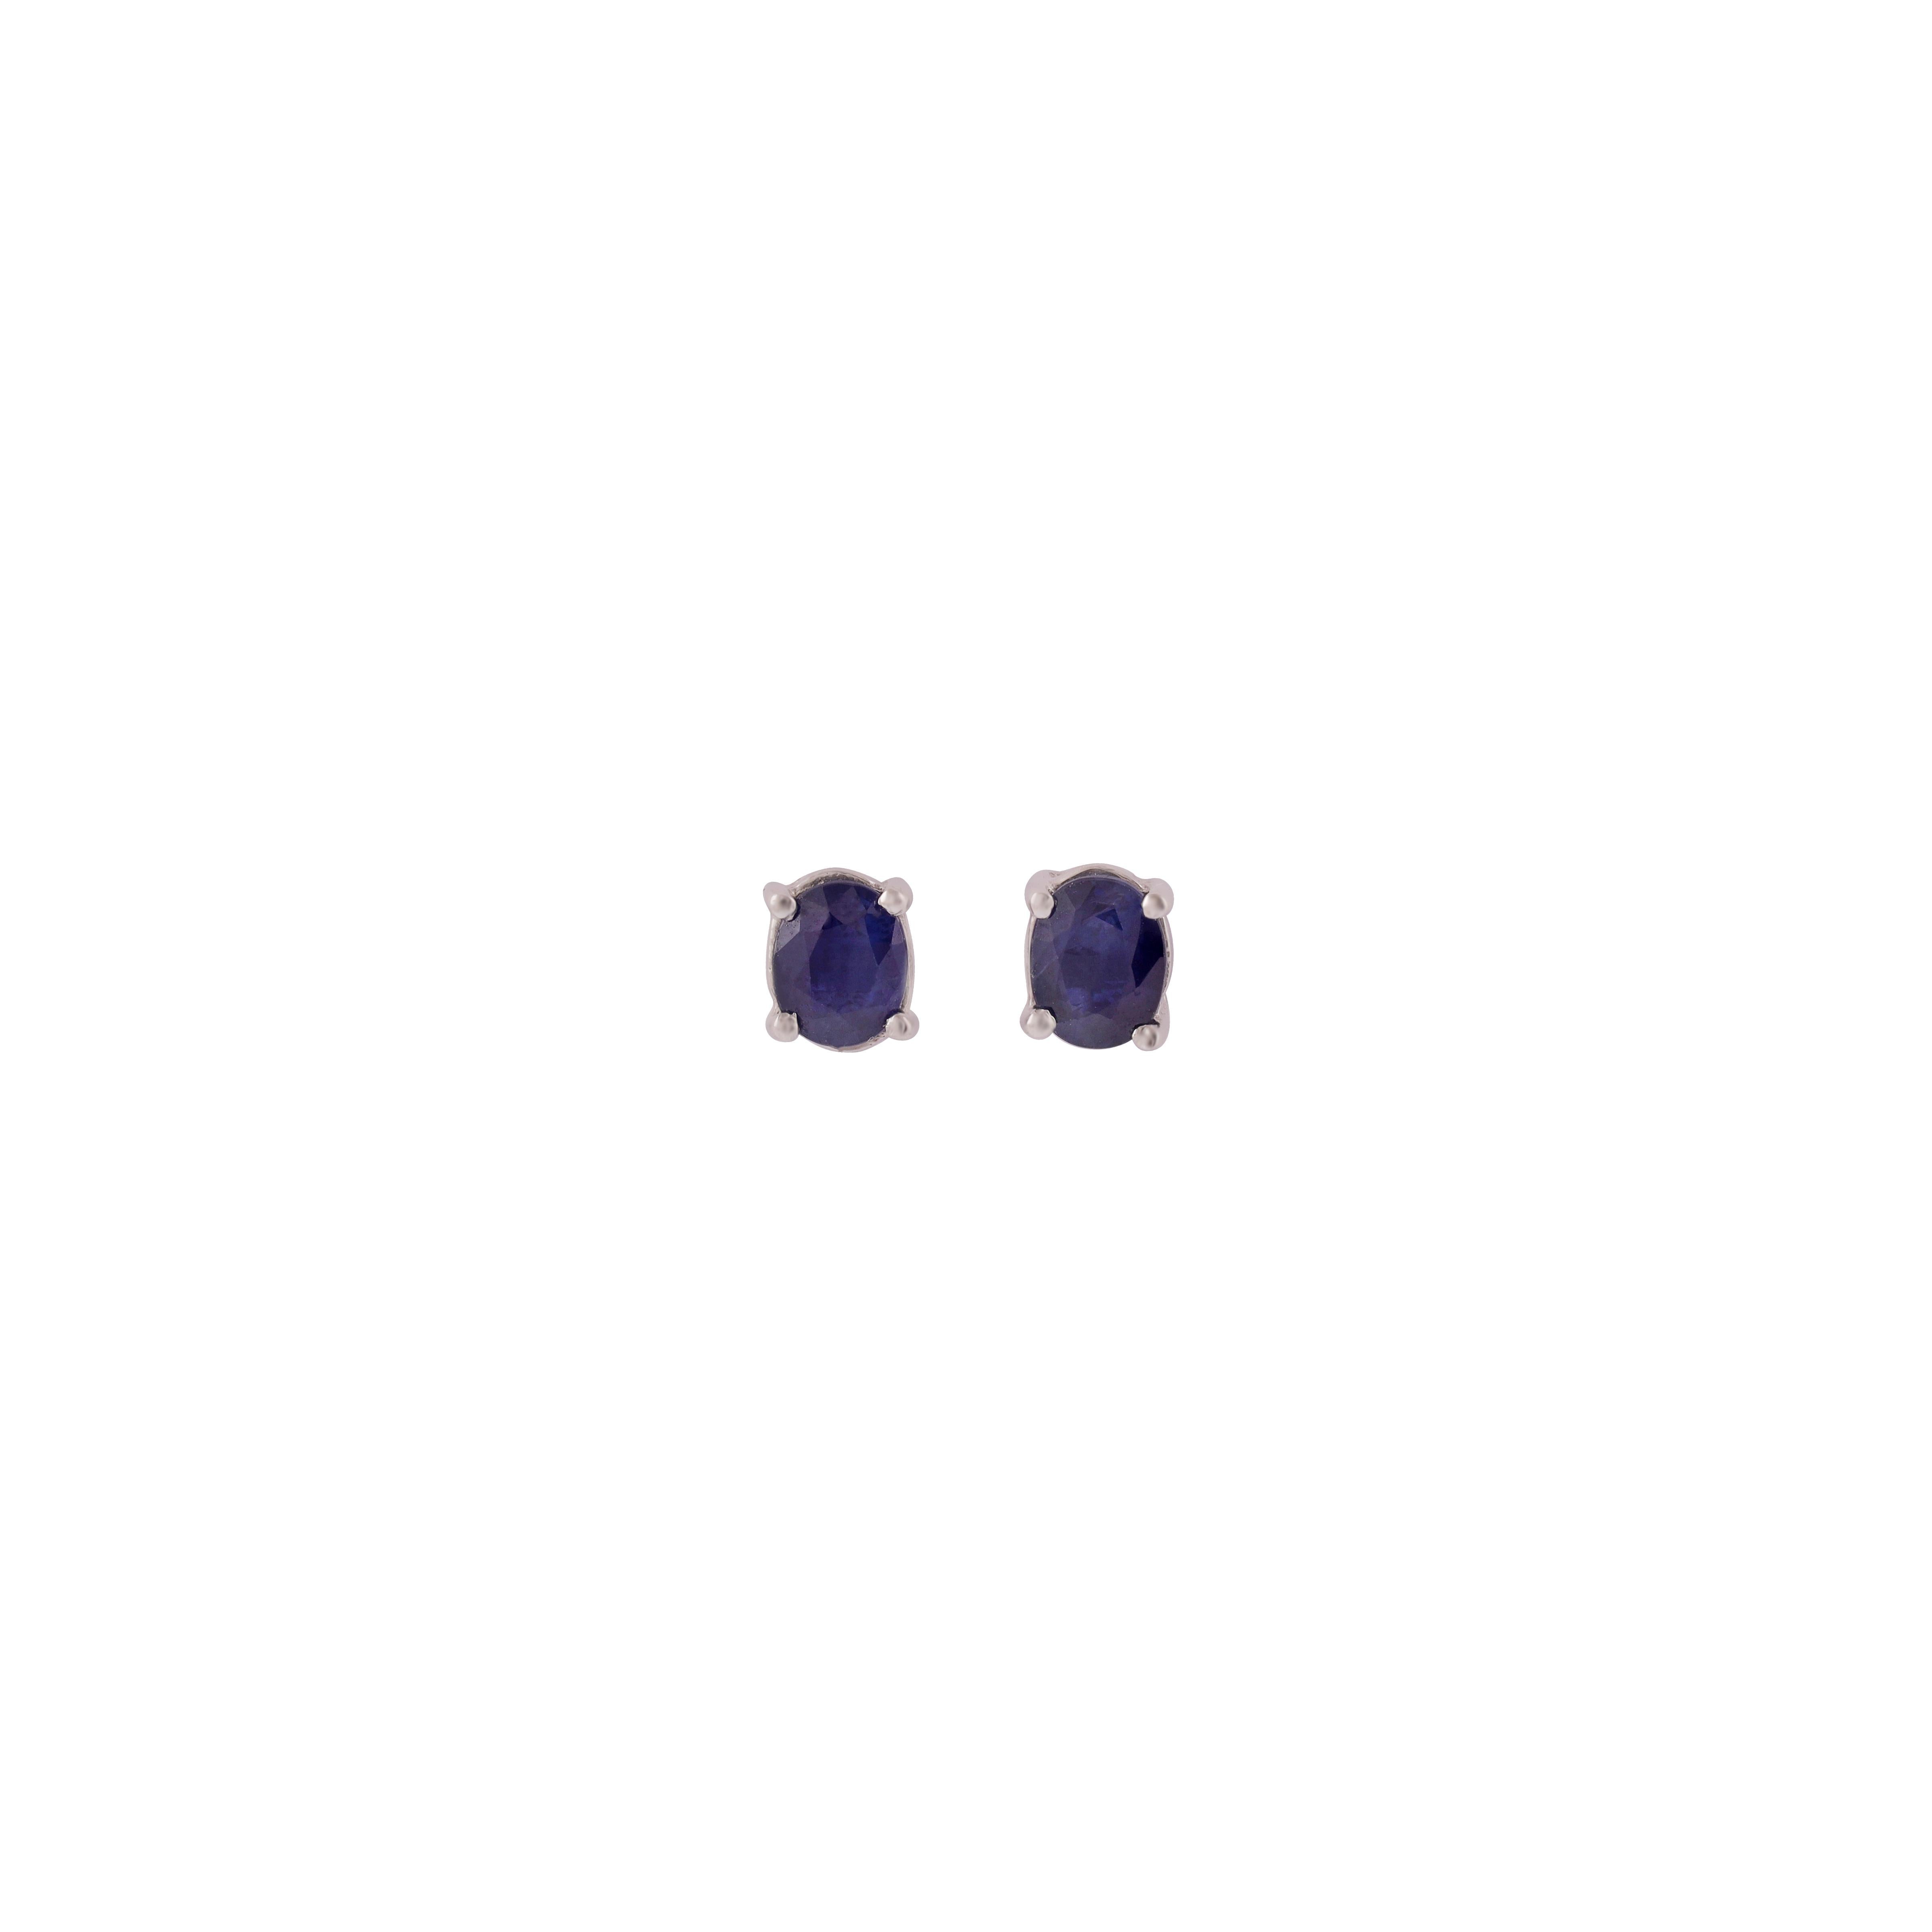 Round Cut 0.64 Carat Sapphire Stud Earrings in 18k White Gold For Sale